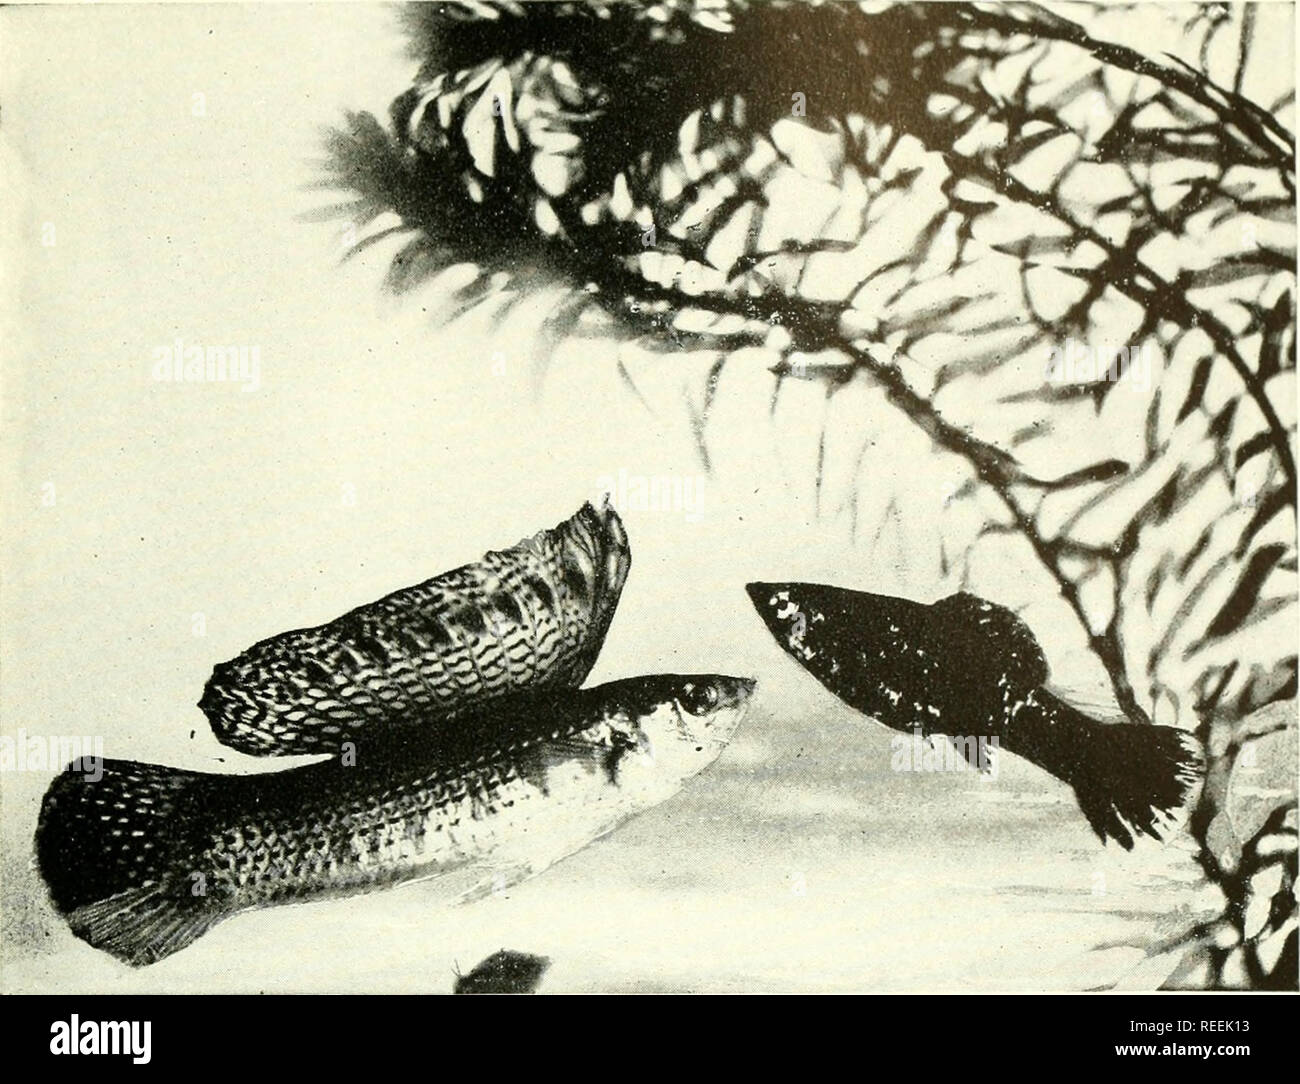 . The complete aquarium book; the care and breeding of goldfish and tropical fishes. Aquariums; Goldfish. Fig. 232. Mollienisia latipinna This is one of the most attractive of the fishes from Southeastern United States and Mexico. After many efforts we were fortunate enough to photograph the male in his- courting regalia. The dorsal fin ordinarily is- not so highly raised but appears as in Fig 234. The female is of the same species but nearly black in color, a natural freak which occurs once in several million specimens. Breeders have mated black specimens together until now a fairly pure stra Stock Photo